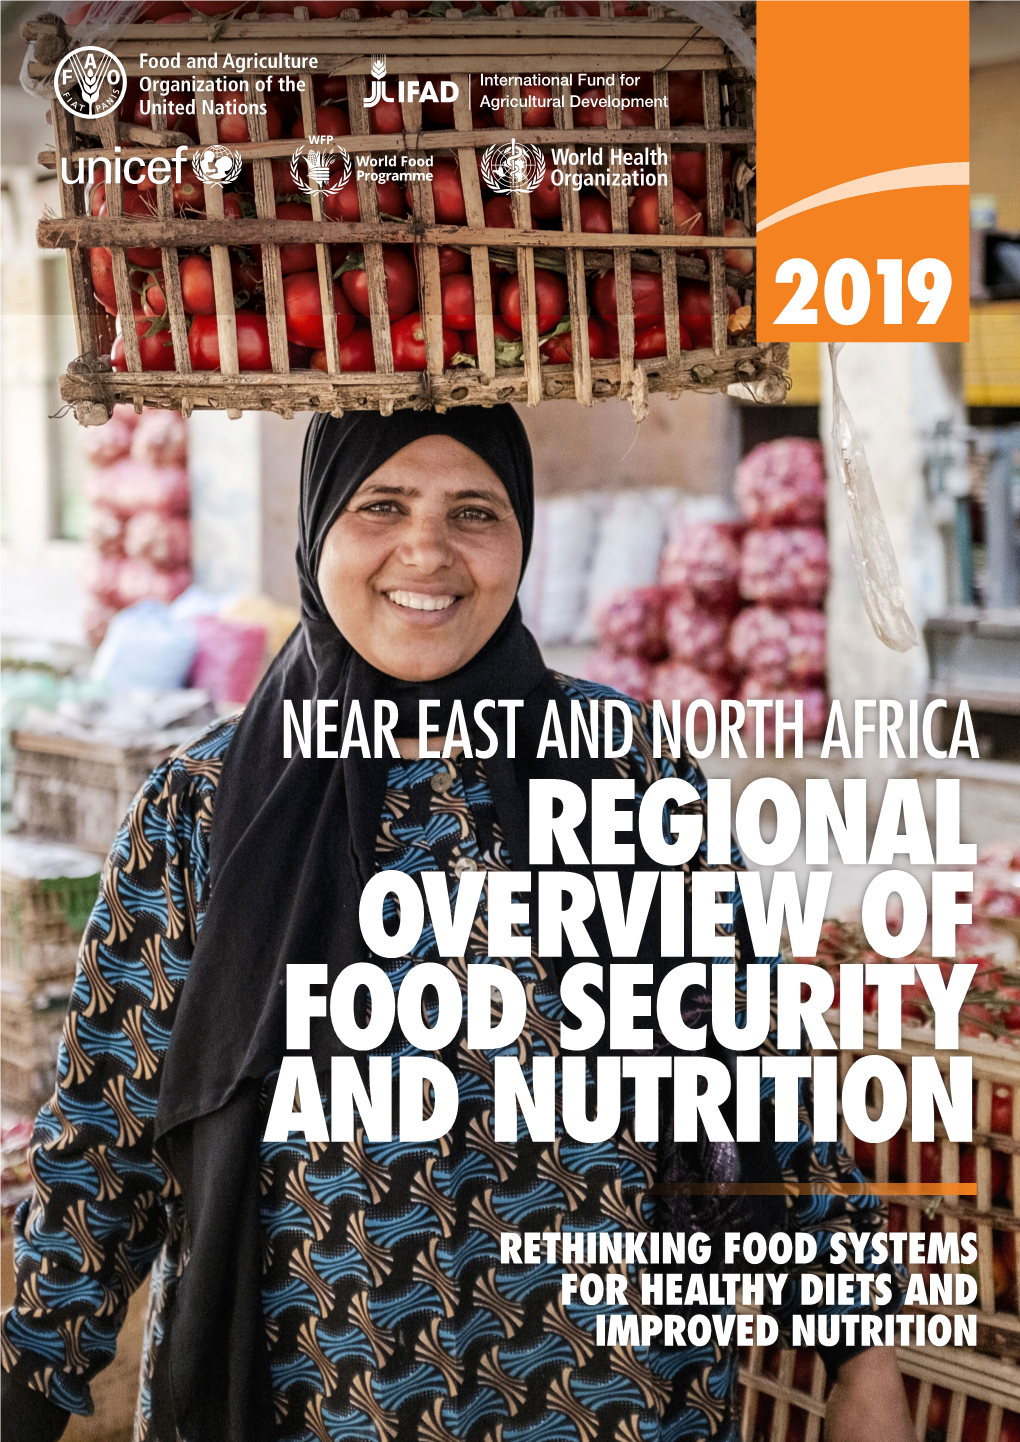 Regional Overview of Food Security and Nutrition in the Near East and North Africa Series of the Food and Agriculture Organization of the United Nations